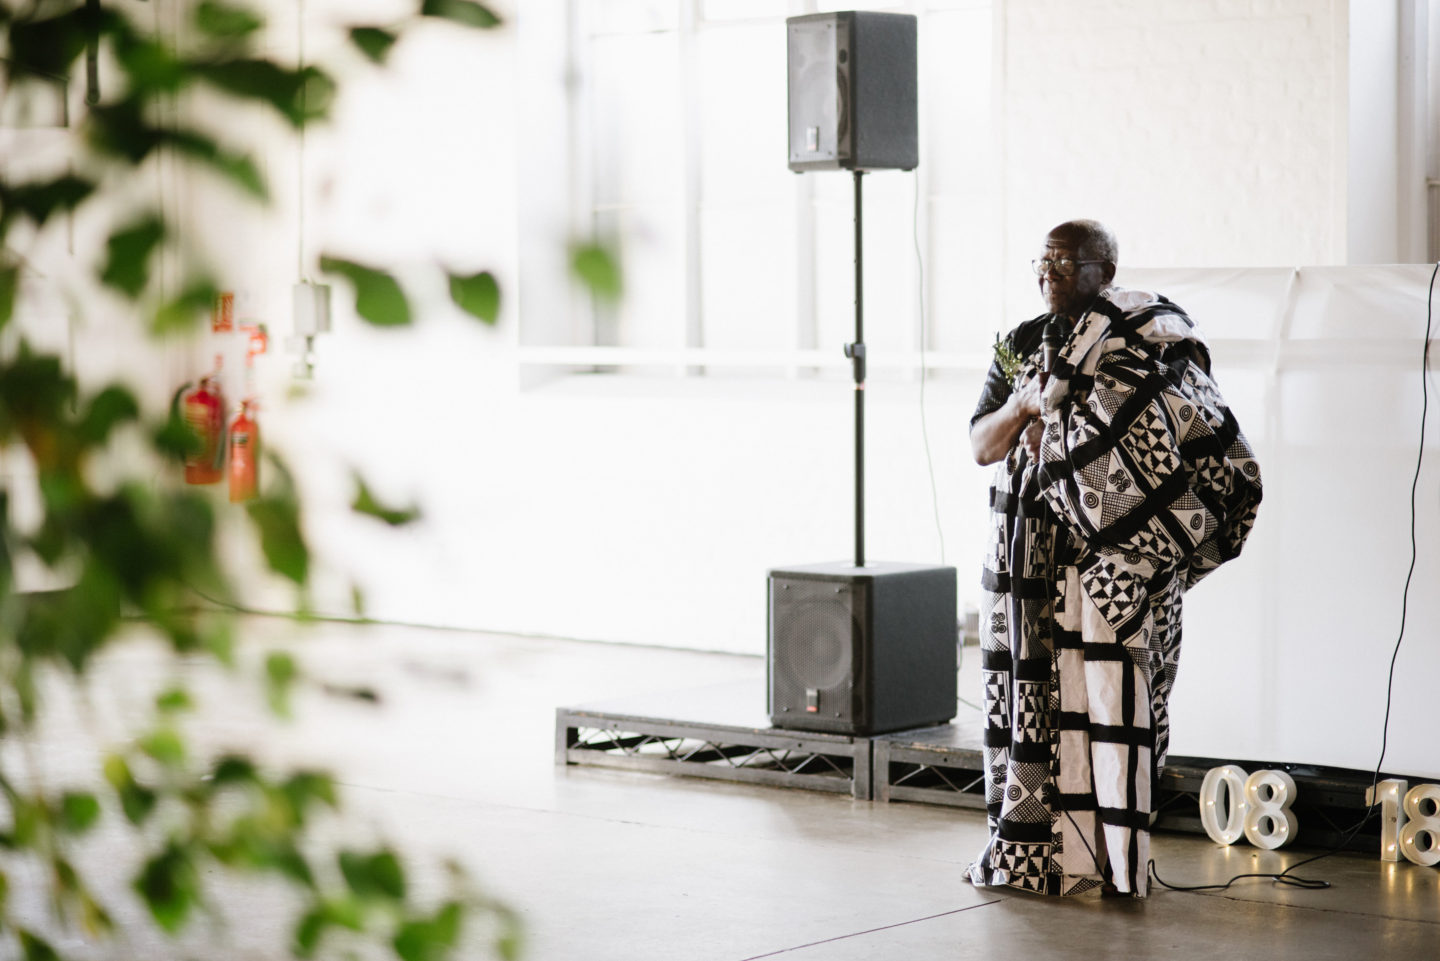 Father of the Bride Wedding Speech. Ghanaian wedding.A Modern, Industrial Warehouse Wedding with Personal Touches